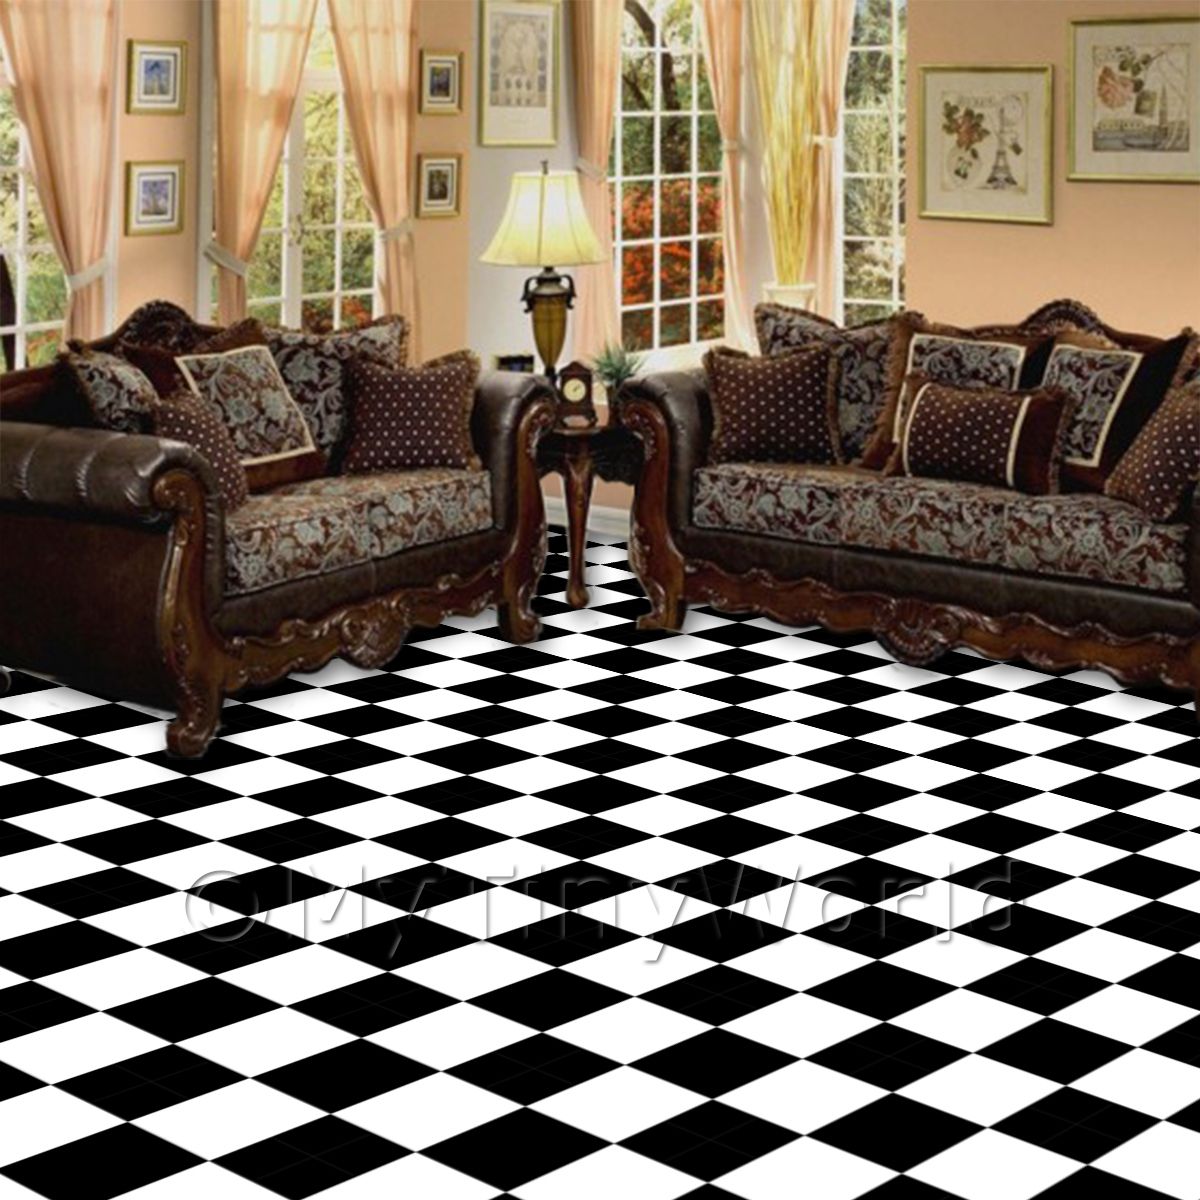 1:48th Classic Black And White Checkerboard Design Tile Sheet 